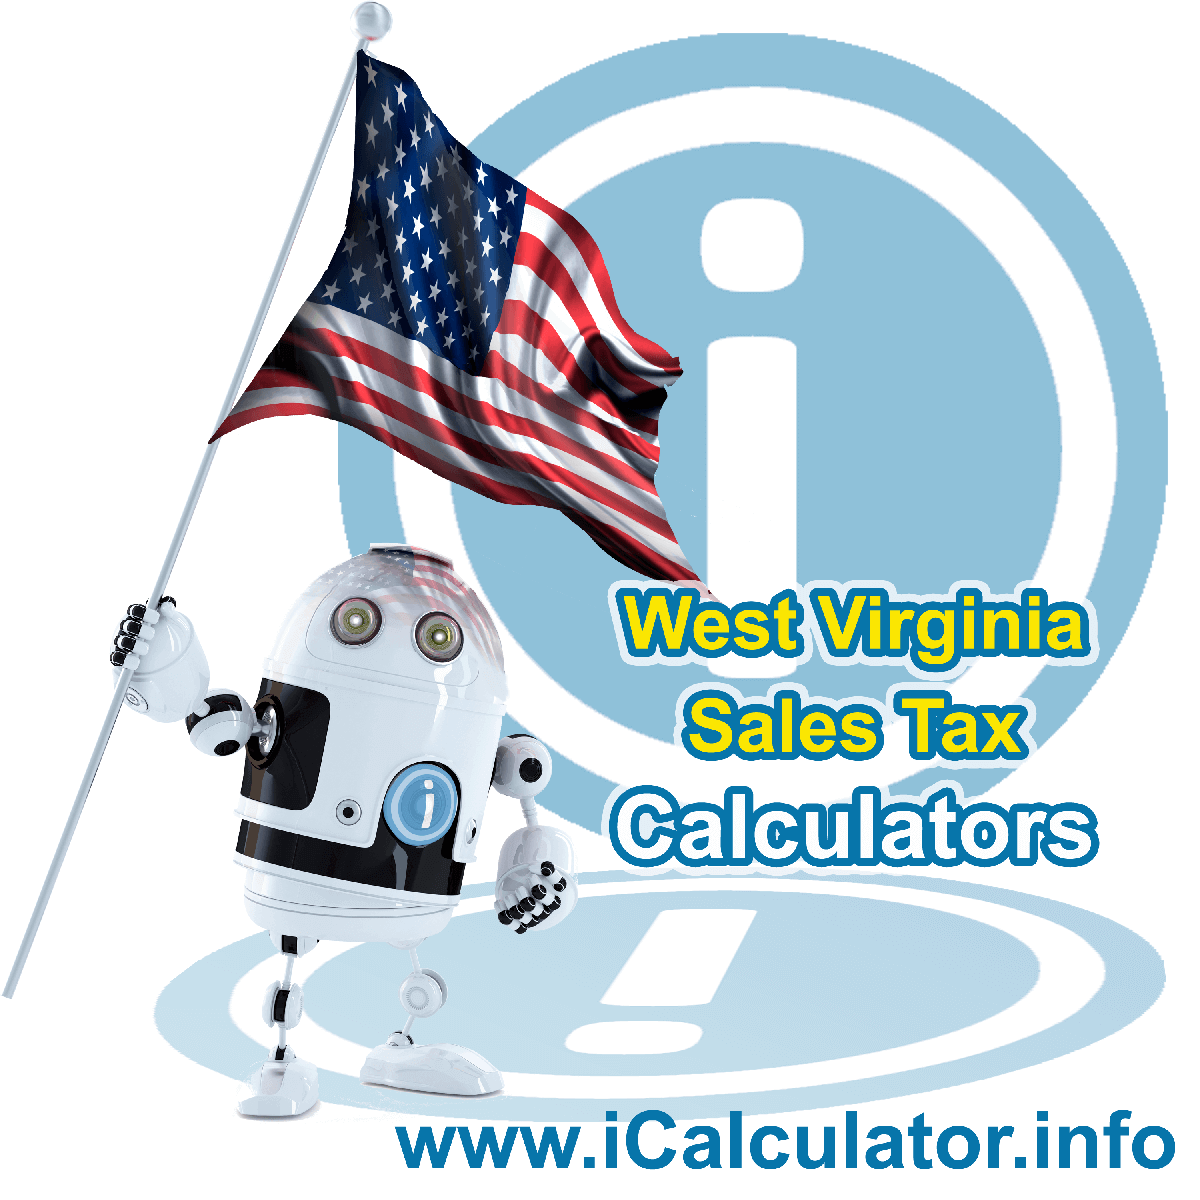 Ranson, West Virginia Sales Tax Comparison Calculator: This image illustrates a calculator robot comparing sales tax in Ranson, West Virginia manually using the Ranson, West Virginia Sales Tax Formula. You can use this information to compare Sales Tax manually or use the Ranson, West Virginia Sales Tax Comparison Calculator to calculate and compare Ranson, West Virginia sales tax online.